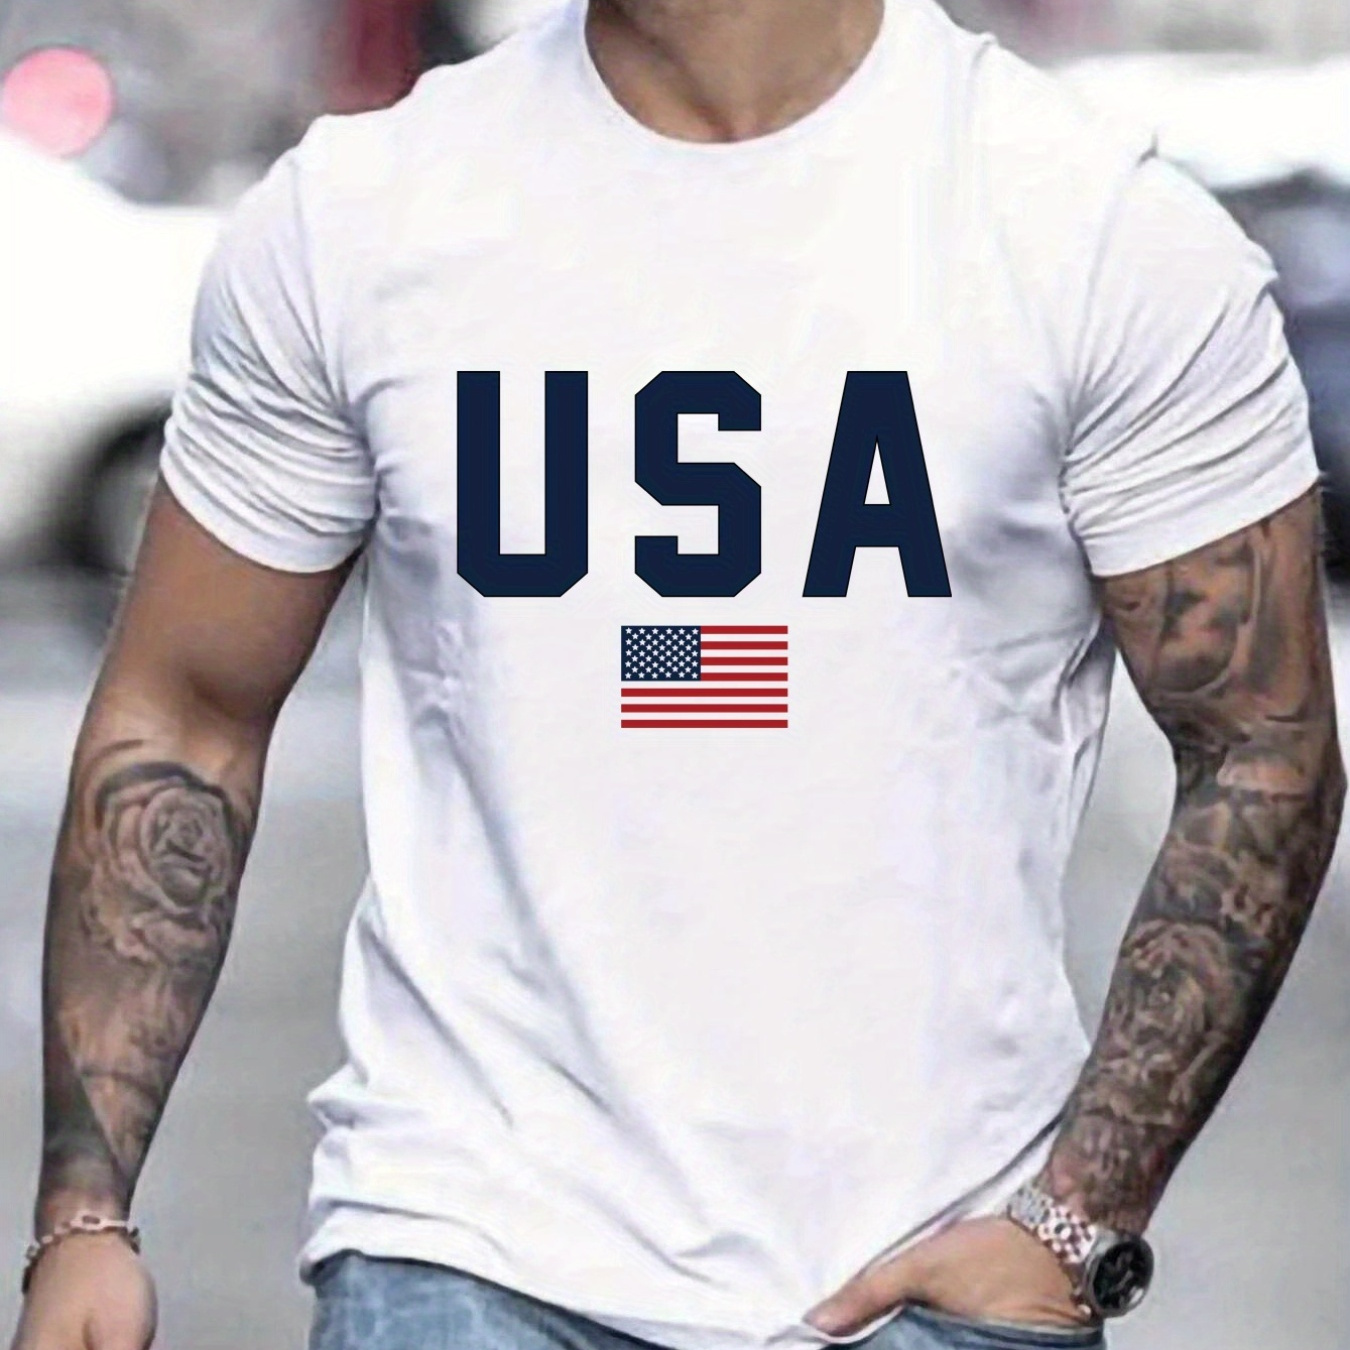 

'usa' Pattern Print Men's Comfy T-shirt, Graphic Tee Men's Summer Outdoor Clothes, Men's Clothing, Tops For Men